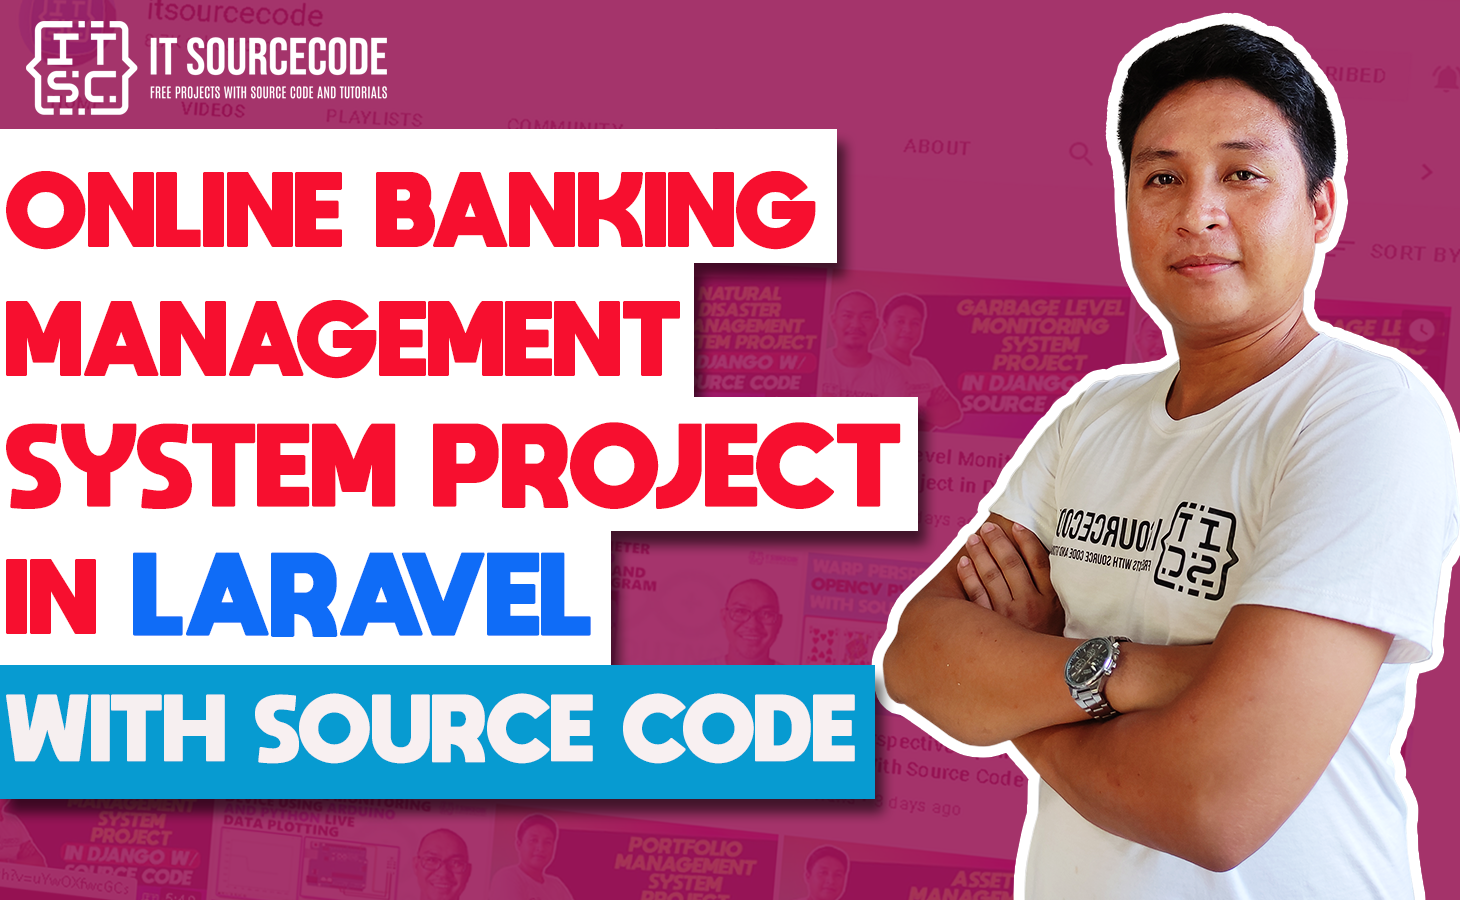 Online Banking Management System Project in Laravel with Source Code